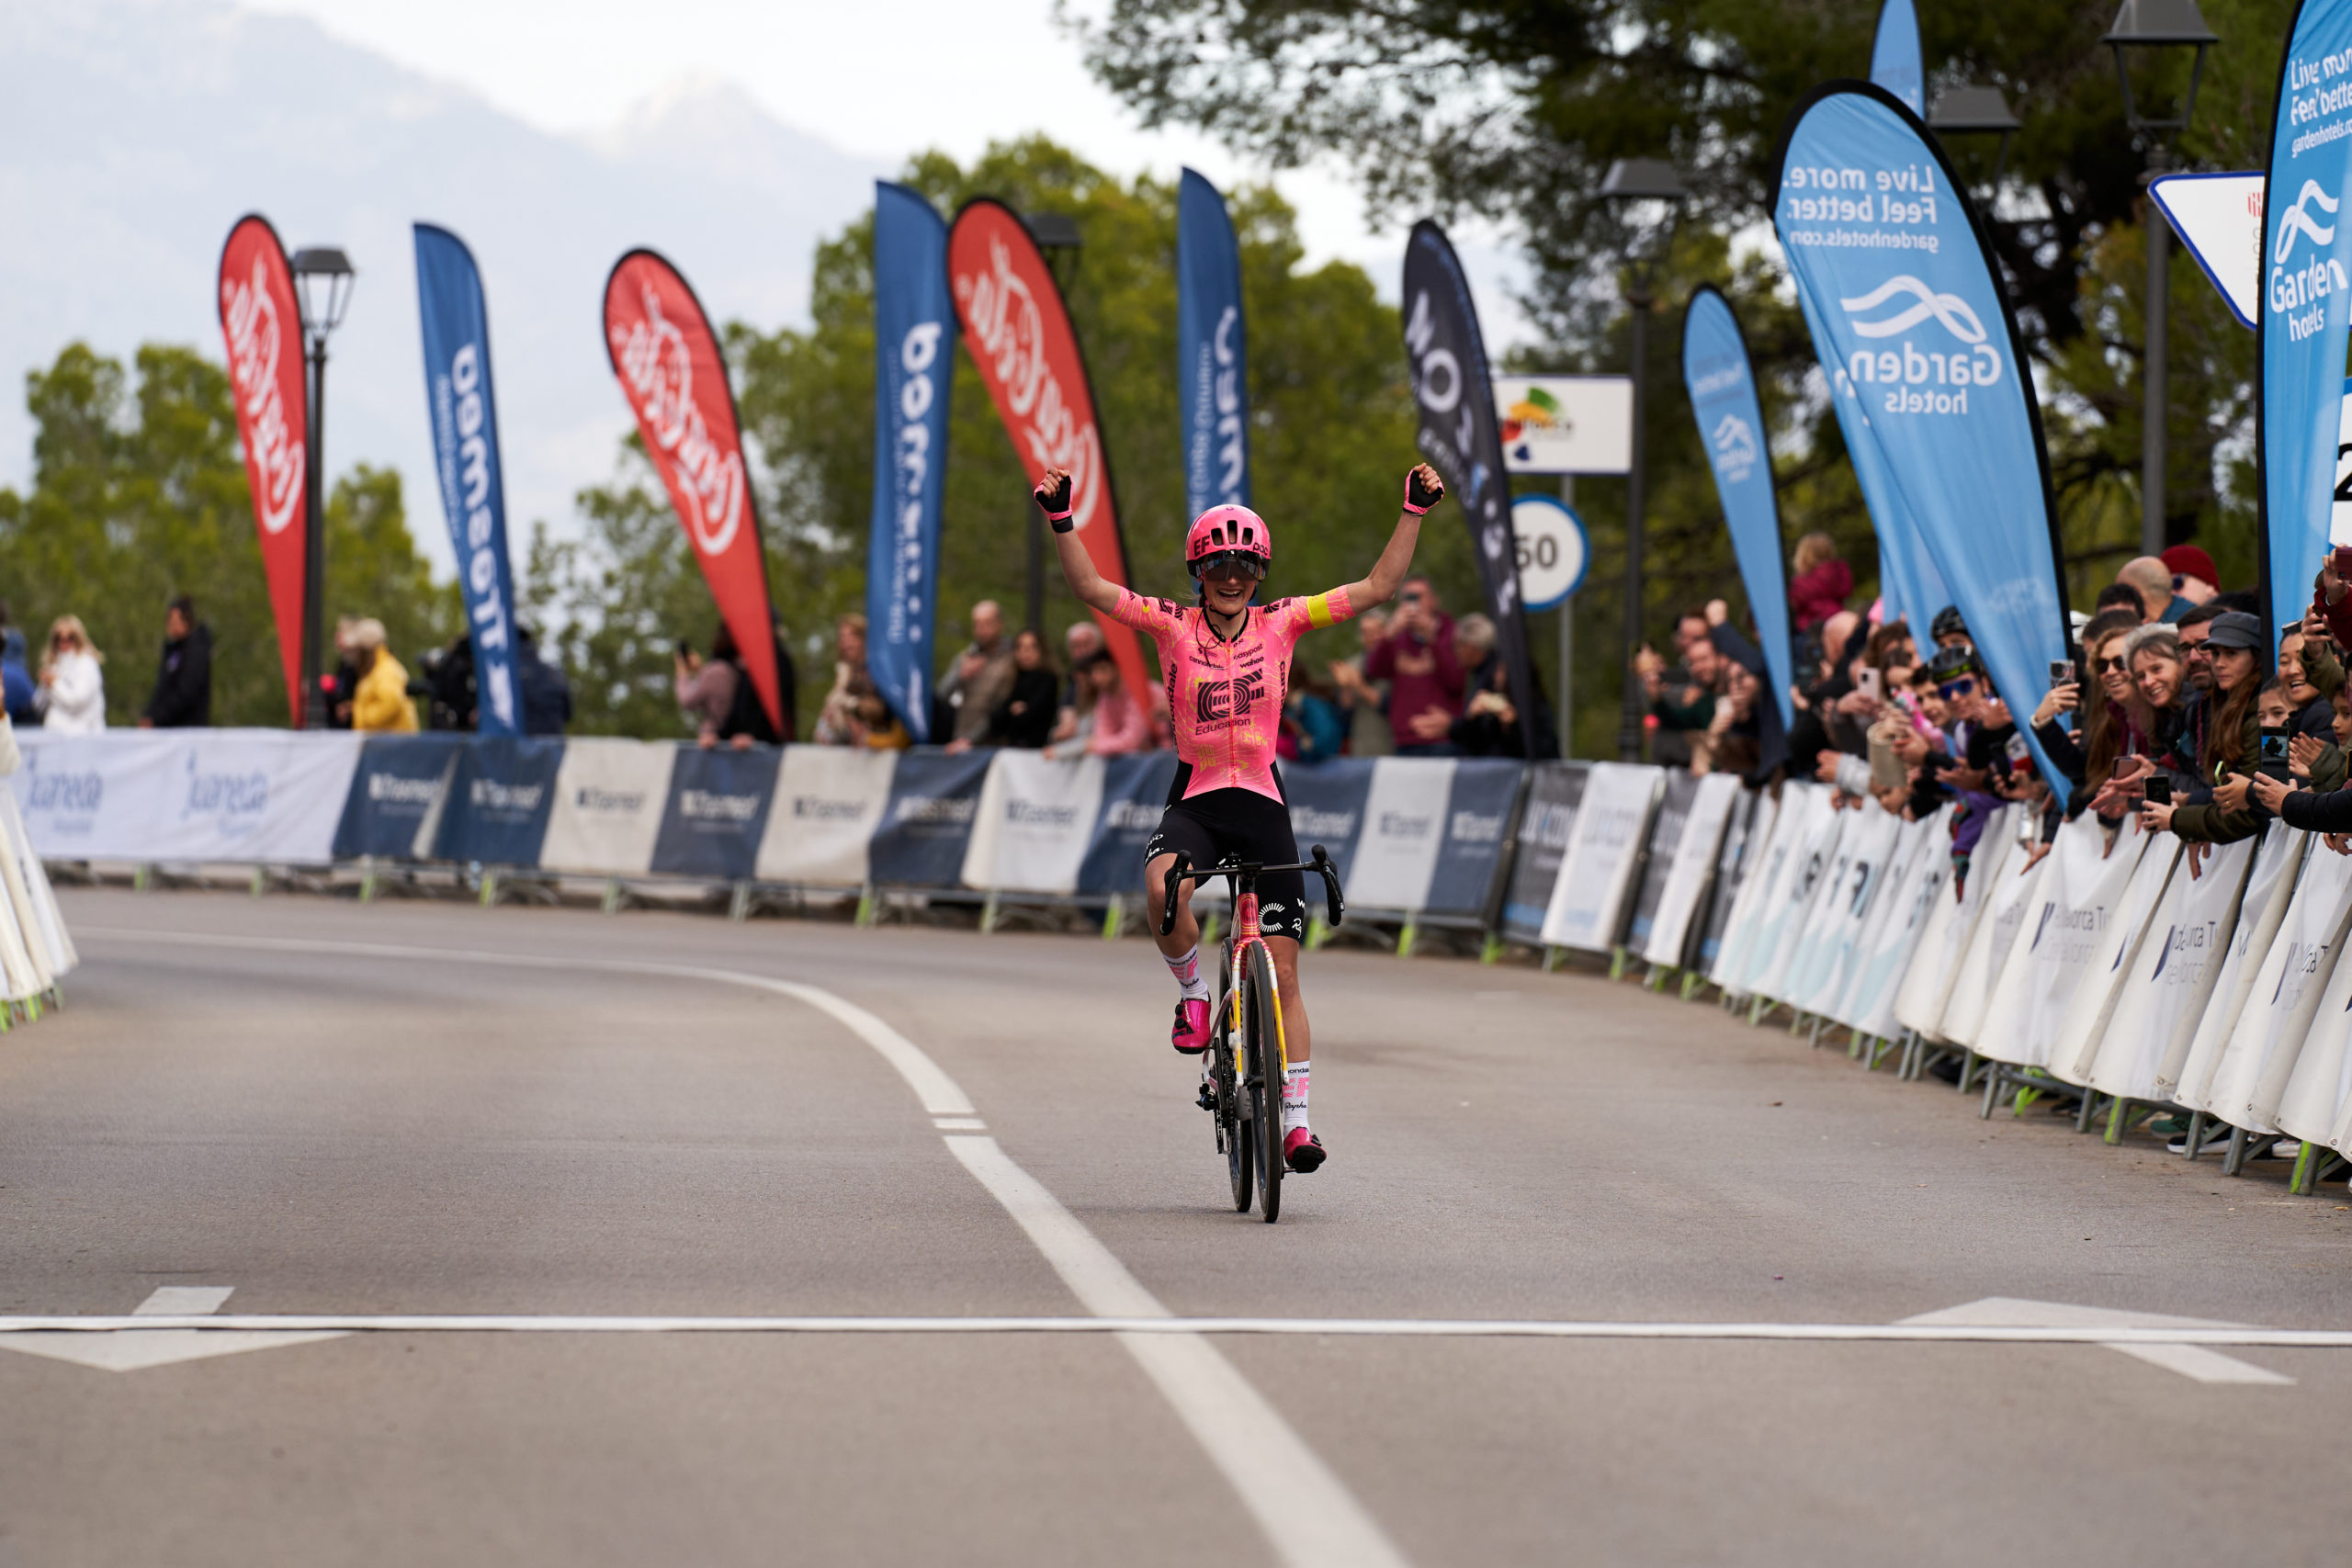 Solo triumph for Vallieres Mill in the Castell de Bellver